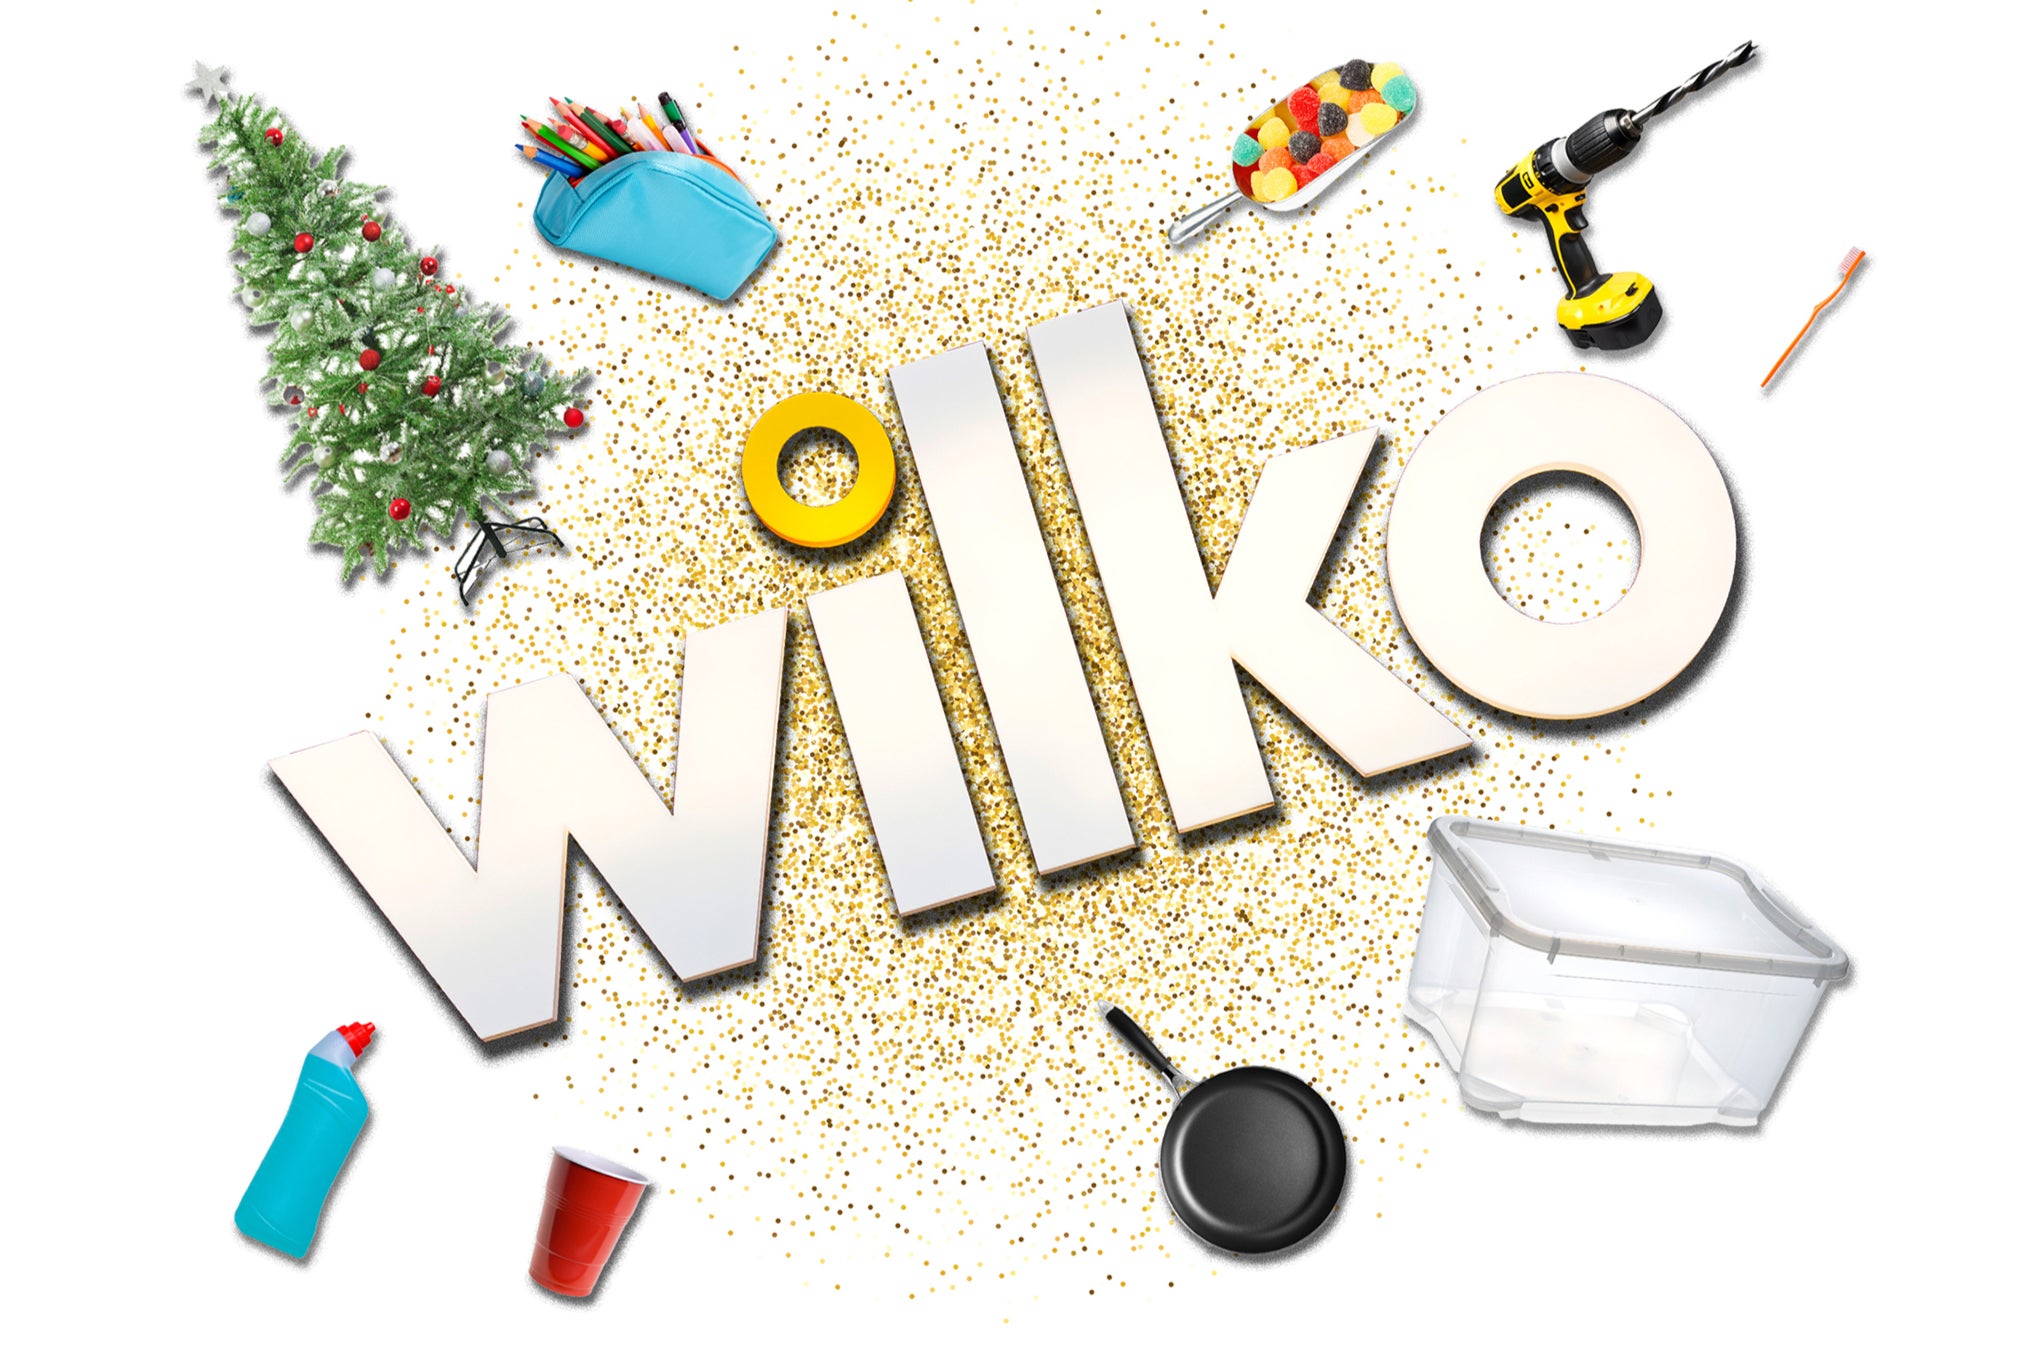 ‘My husband will ask me what I need, and I reply: “Wilko will tell me”’